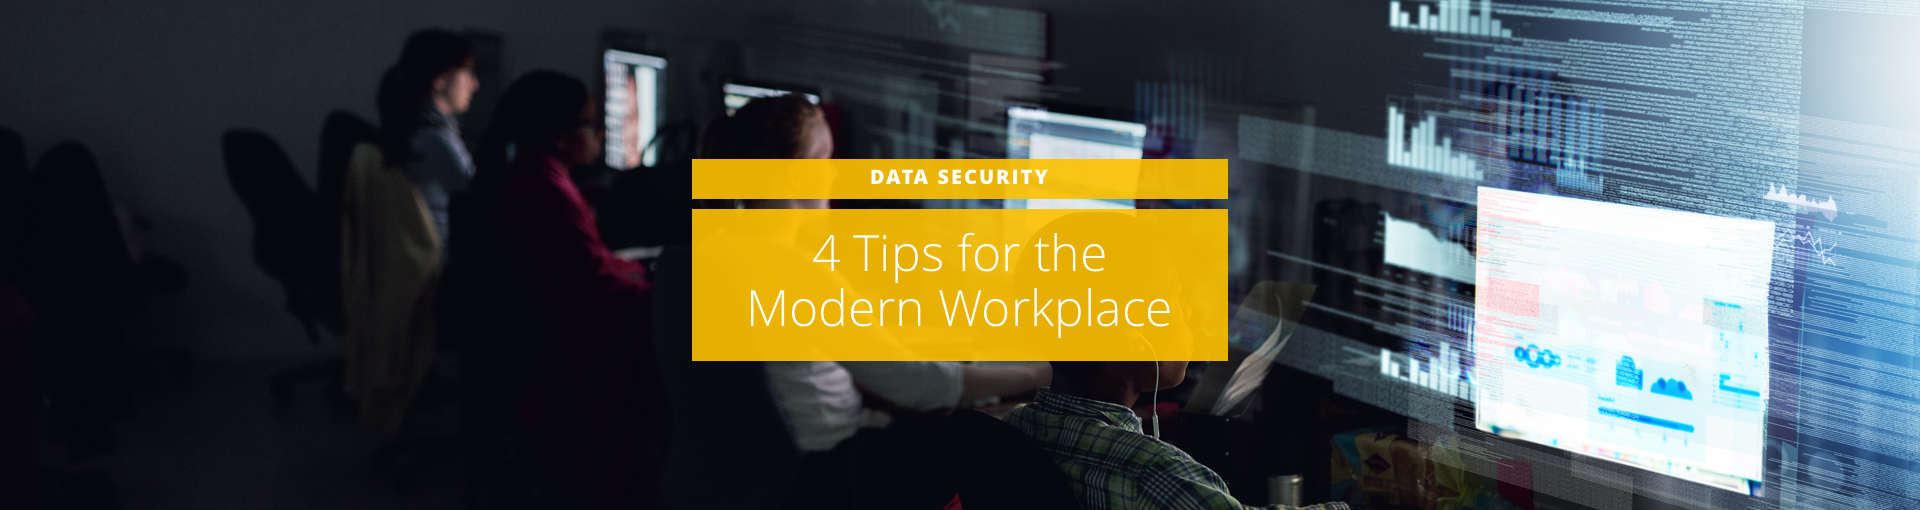 Data Security: 4 Tips for the Modern Workplace Featured Image